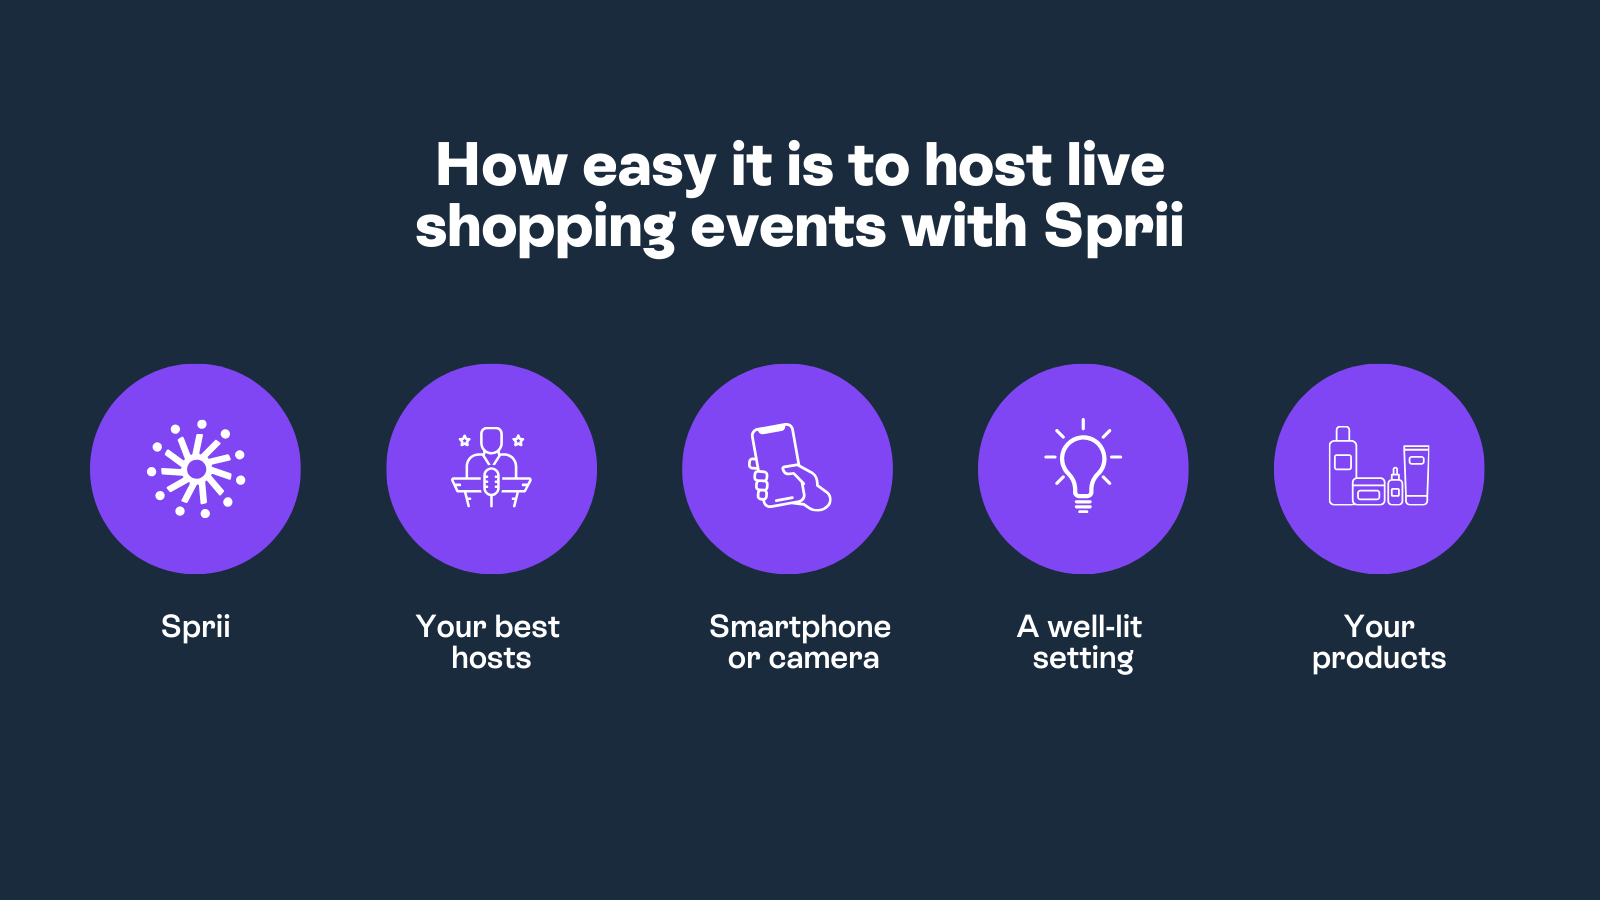 This is what you need to host live shopping events